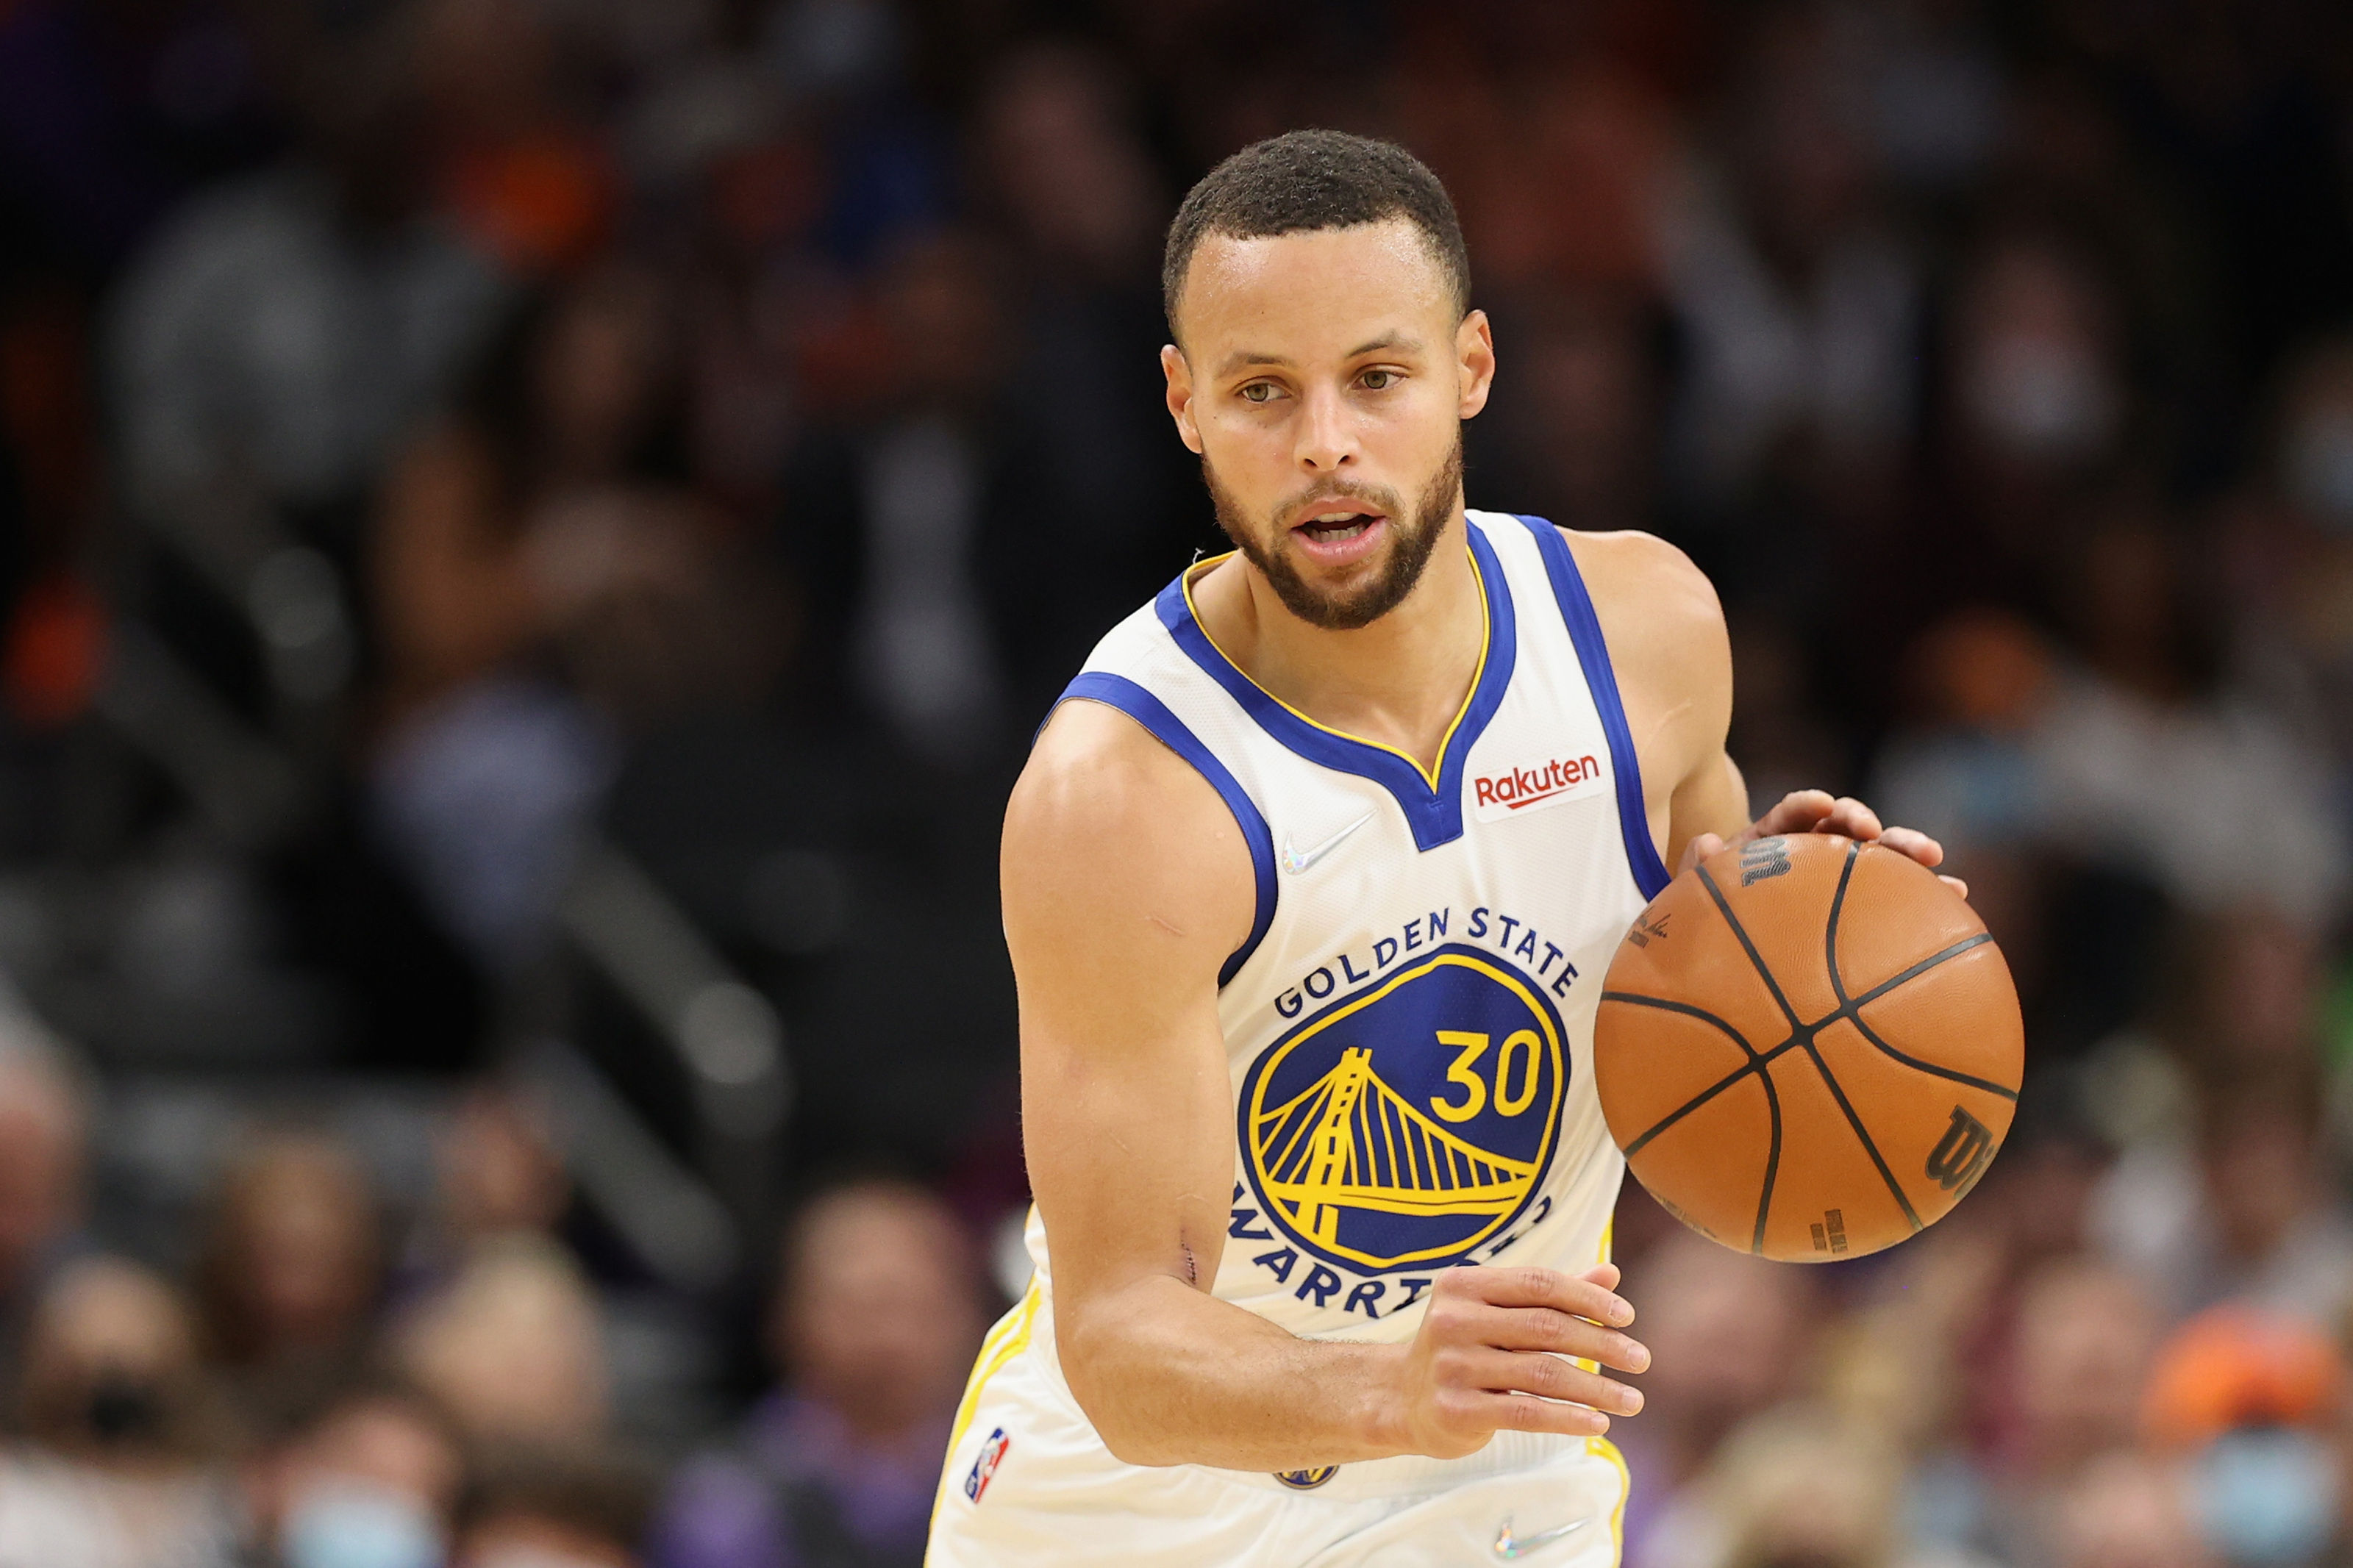 Golden State Warriors: Expect a bounce back game from Stephen Curry